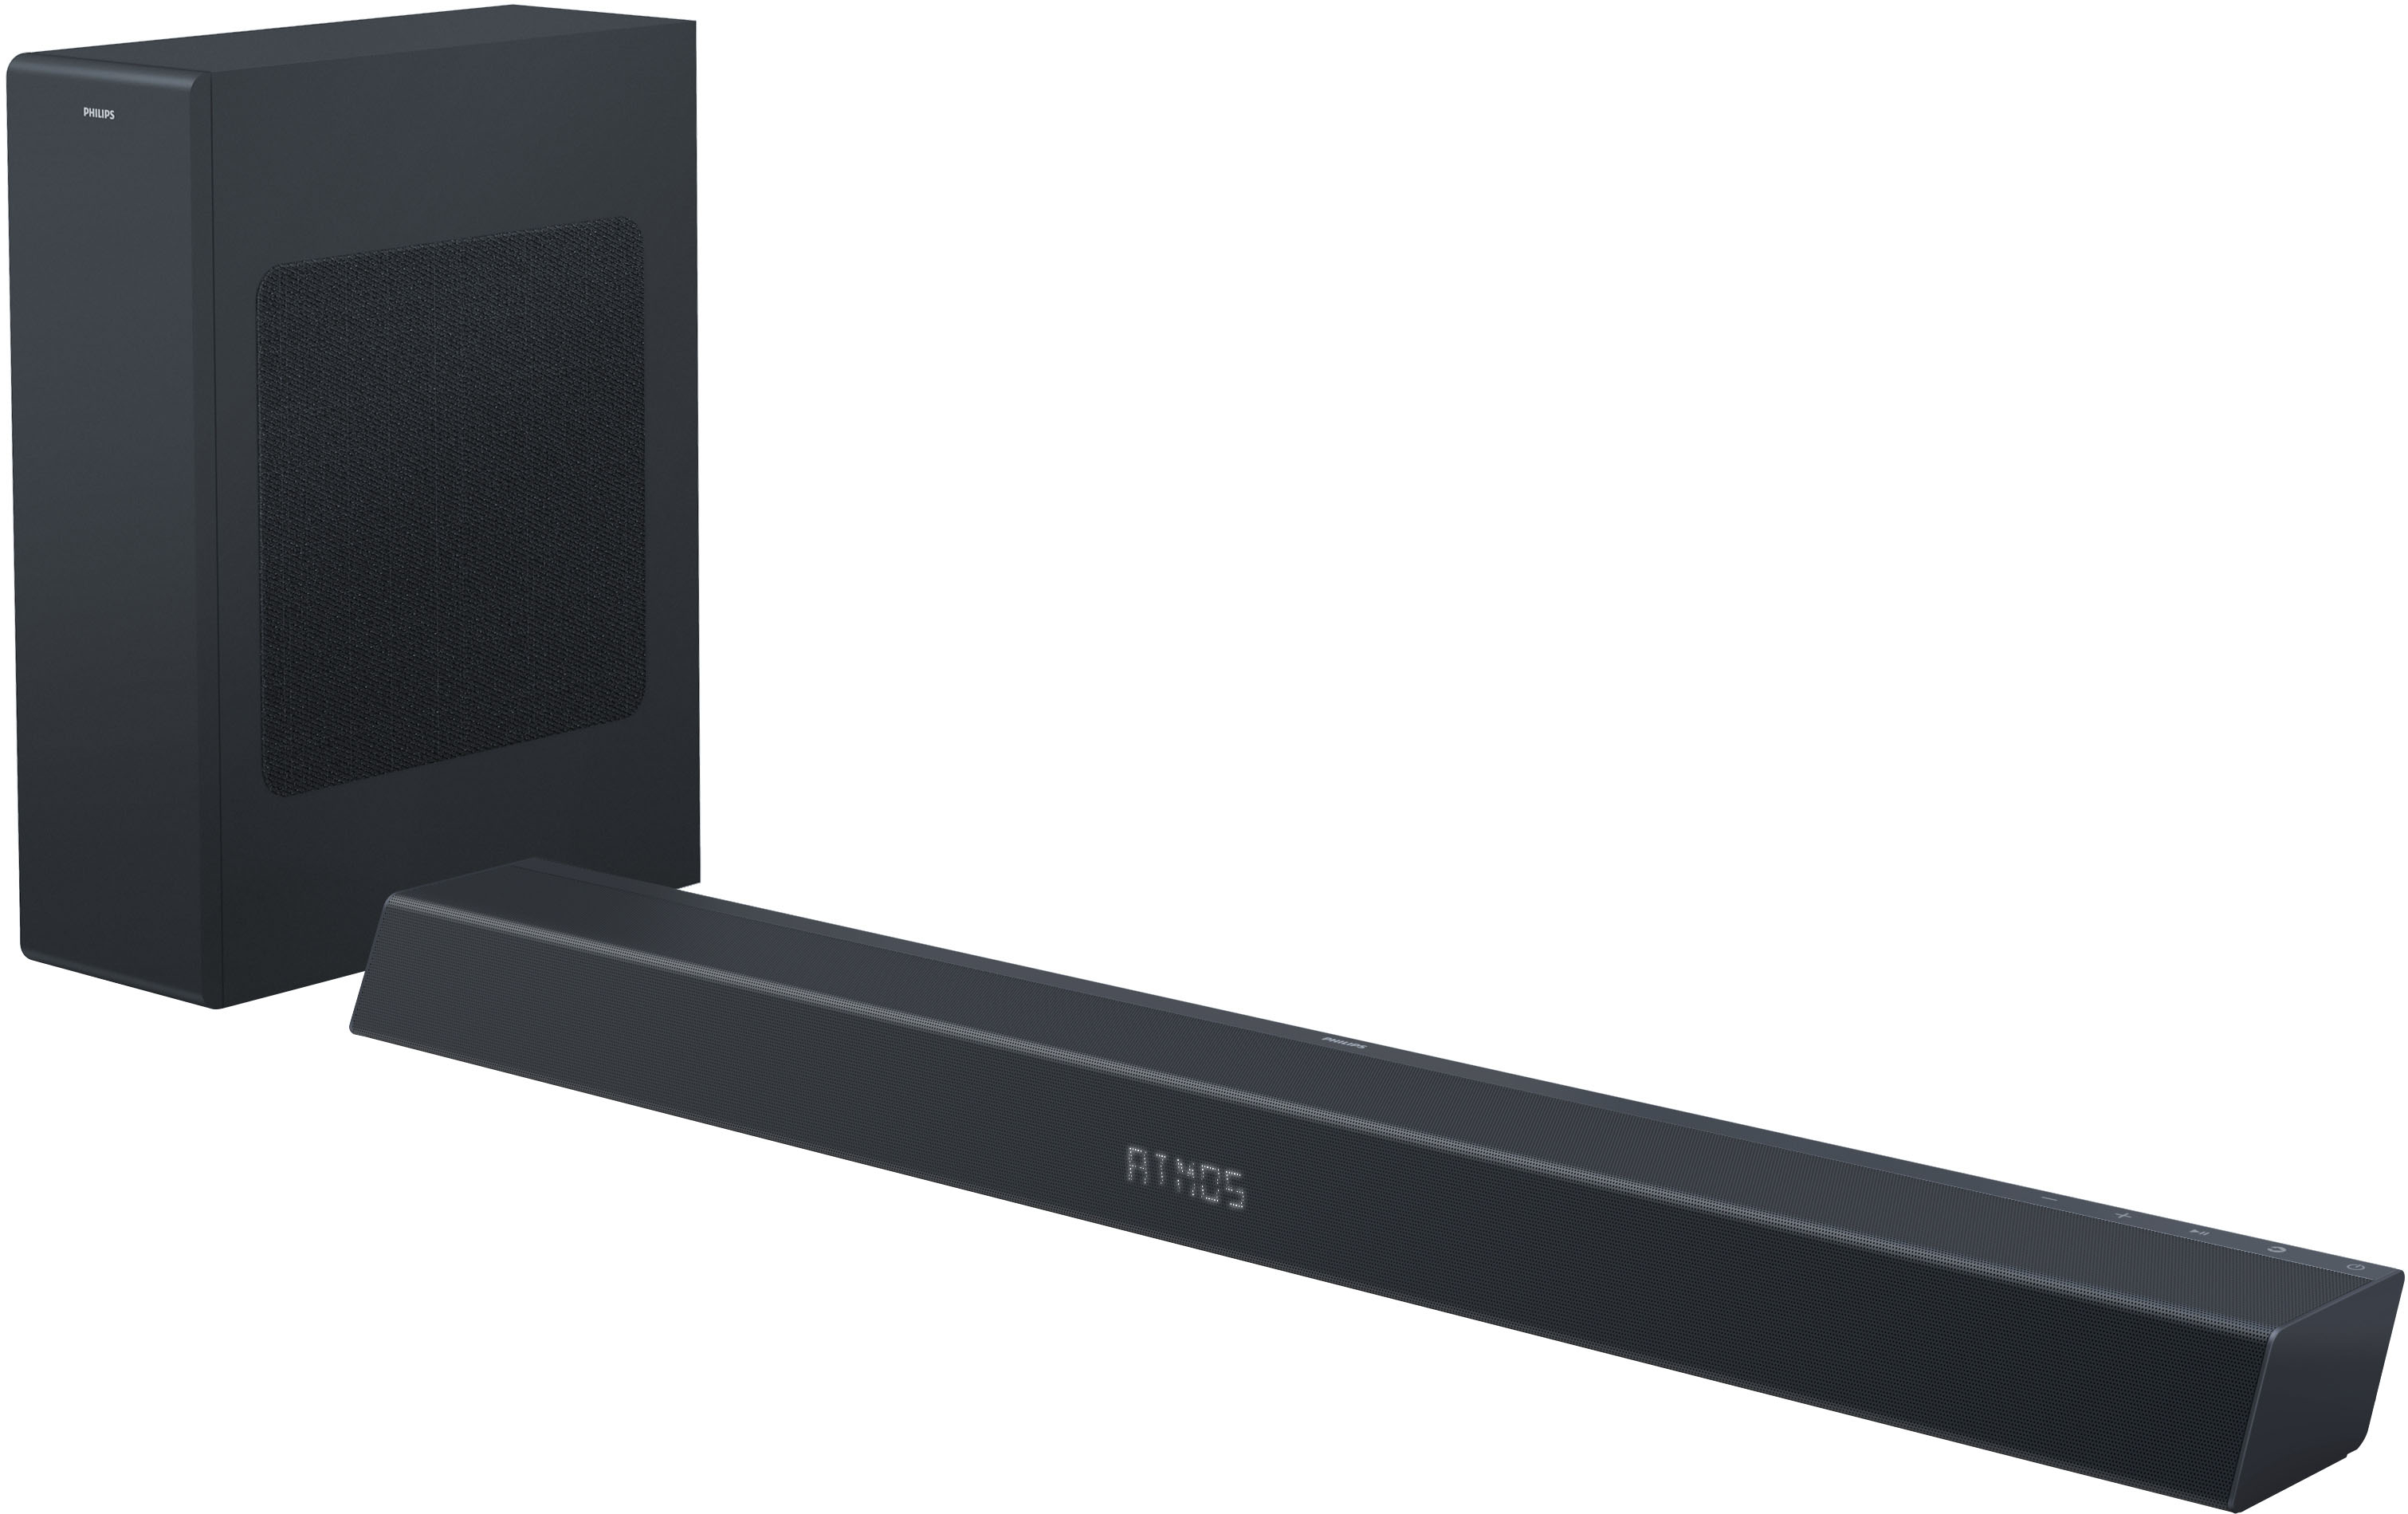 Angle View: Philips - 2.1-Channel Soundbar with Wireless Subwoofer, Dolby Atmos and expandable surround sound - Dark grey